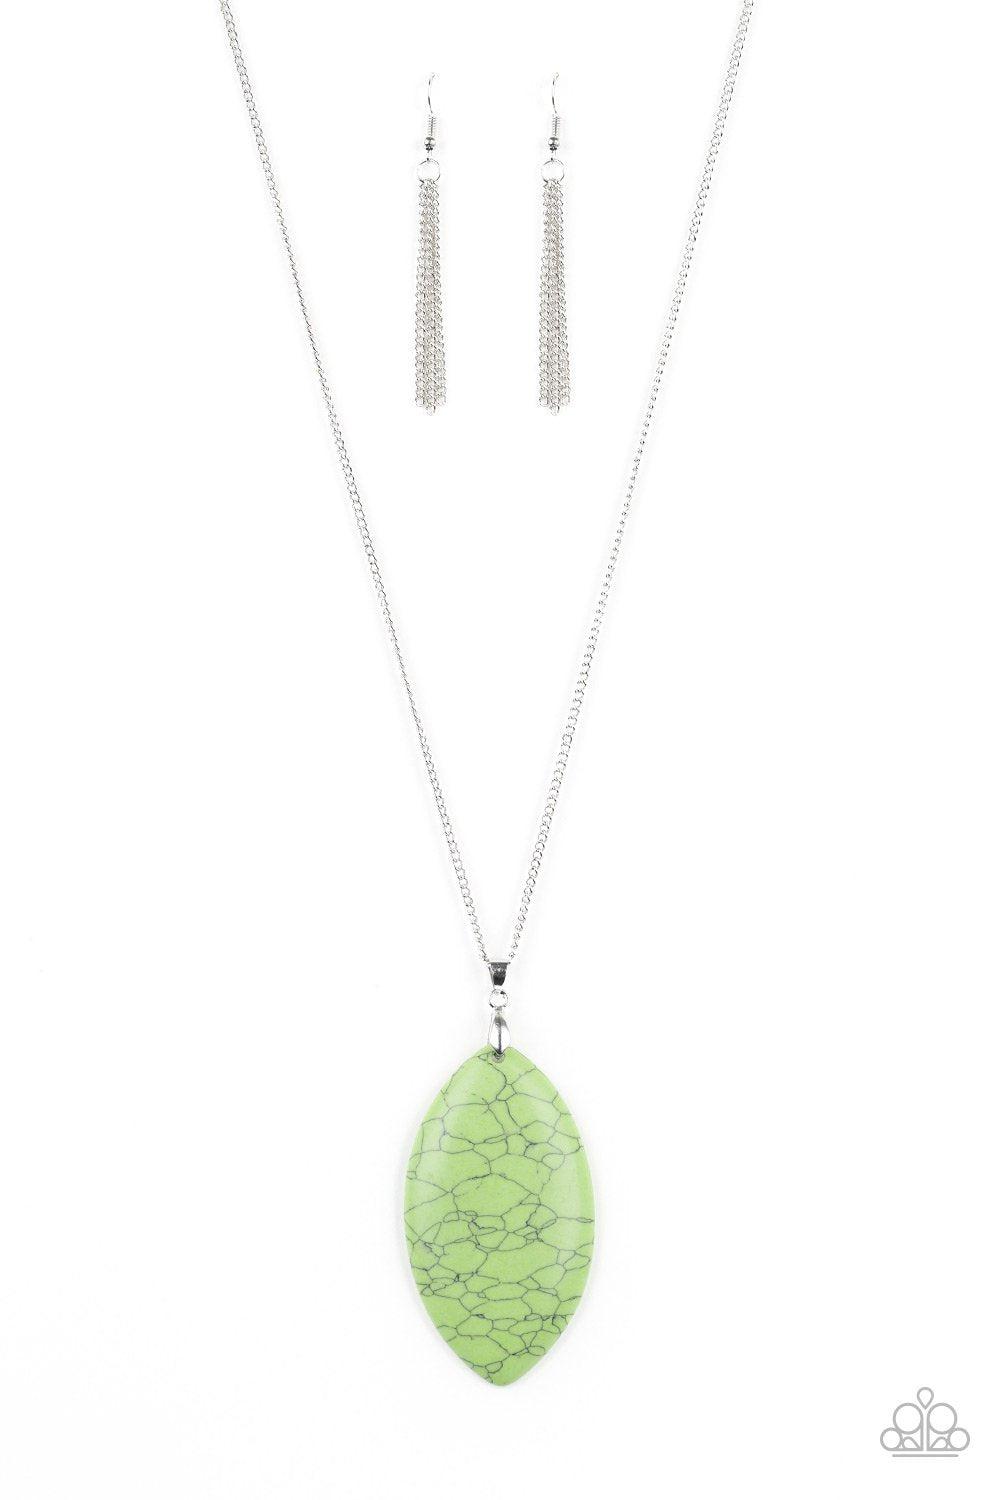 Santa Fe Simplicity Green Stone Pendant Necklace - Paparazzi Accessories-CarasShop.com - $5 Jewelry by Cara Jewels